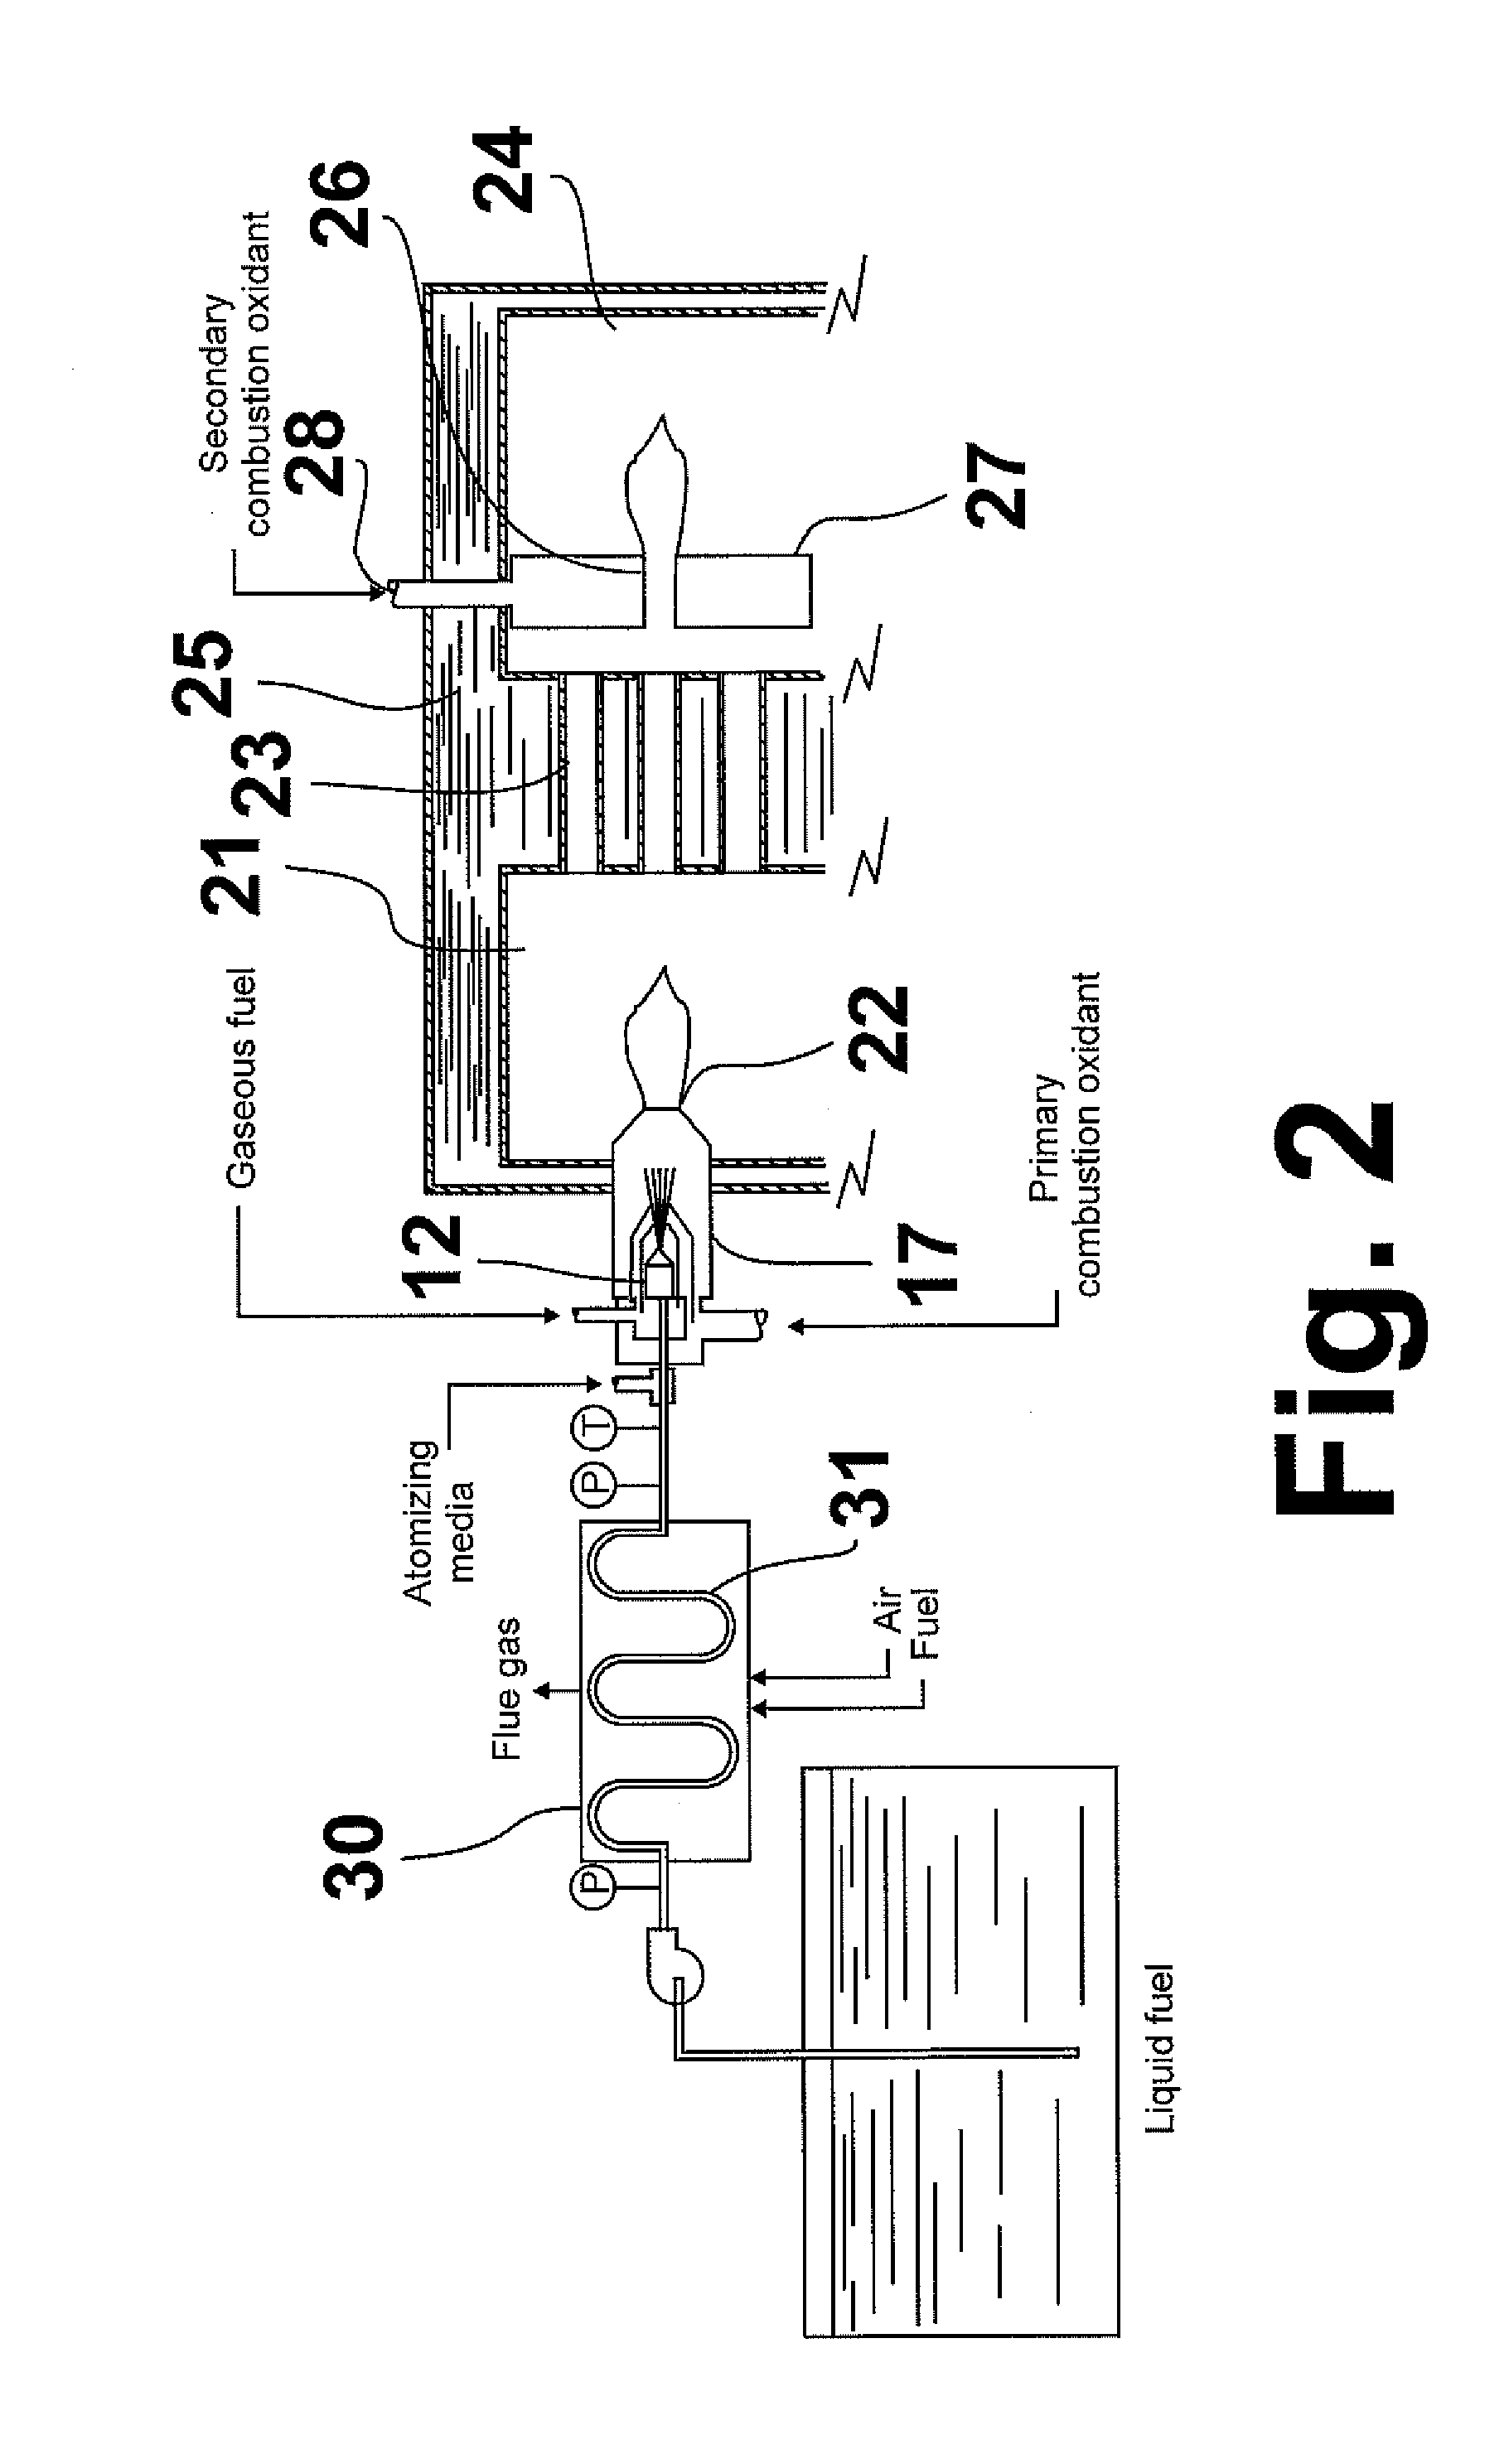 METHOD AND SYSTEM FOR LOW-NOx DUAL-FUEL COMBUSTION OF LIQUID AND/OR GASEOUS FUELS